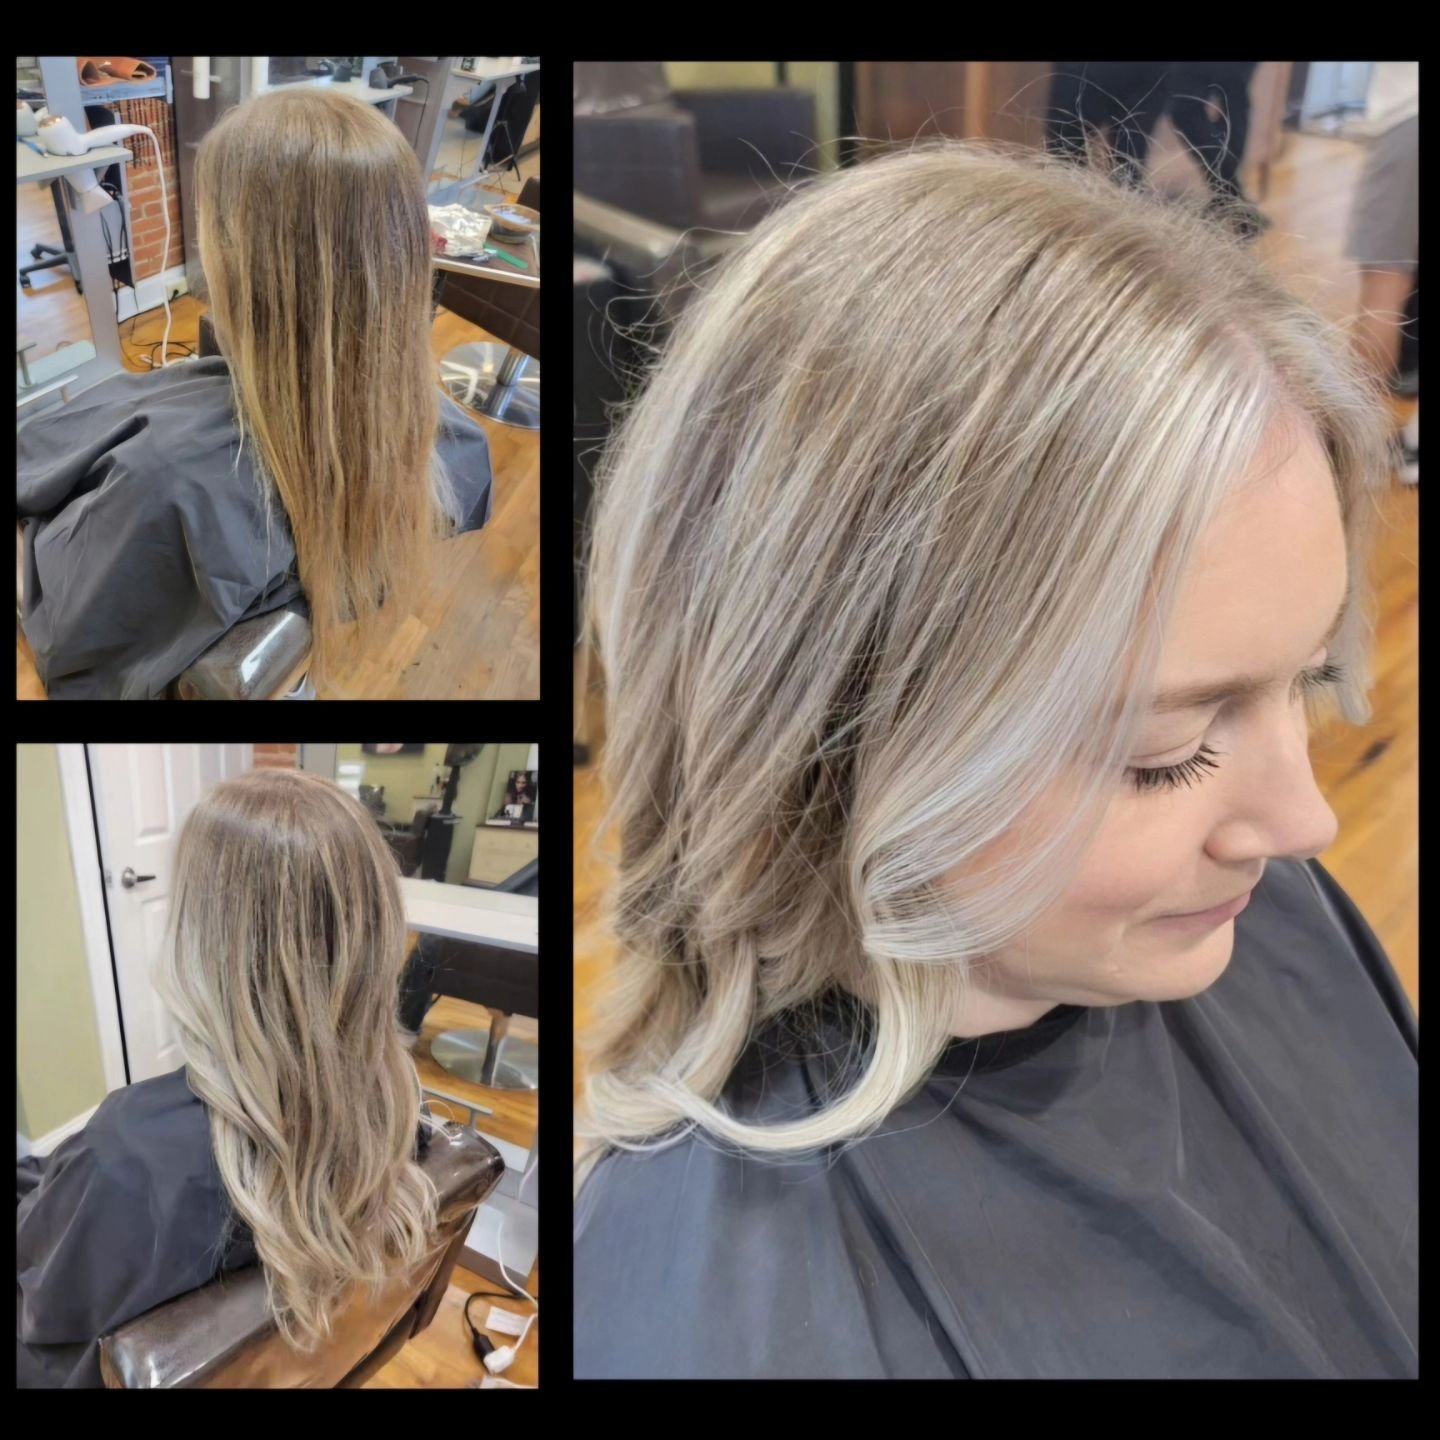 Our designer, Alyssa, gave her client a fresh balayage highlight and a money piece around the face for added brightness.  Let Alyssa or any of our beauty professionals help you find the color that best fits your lifestyle.  Book an appointment today 